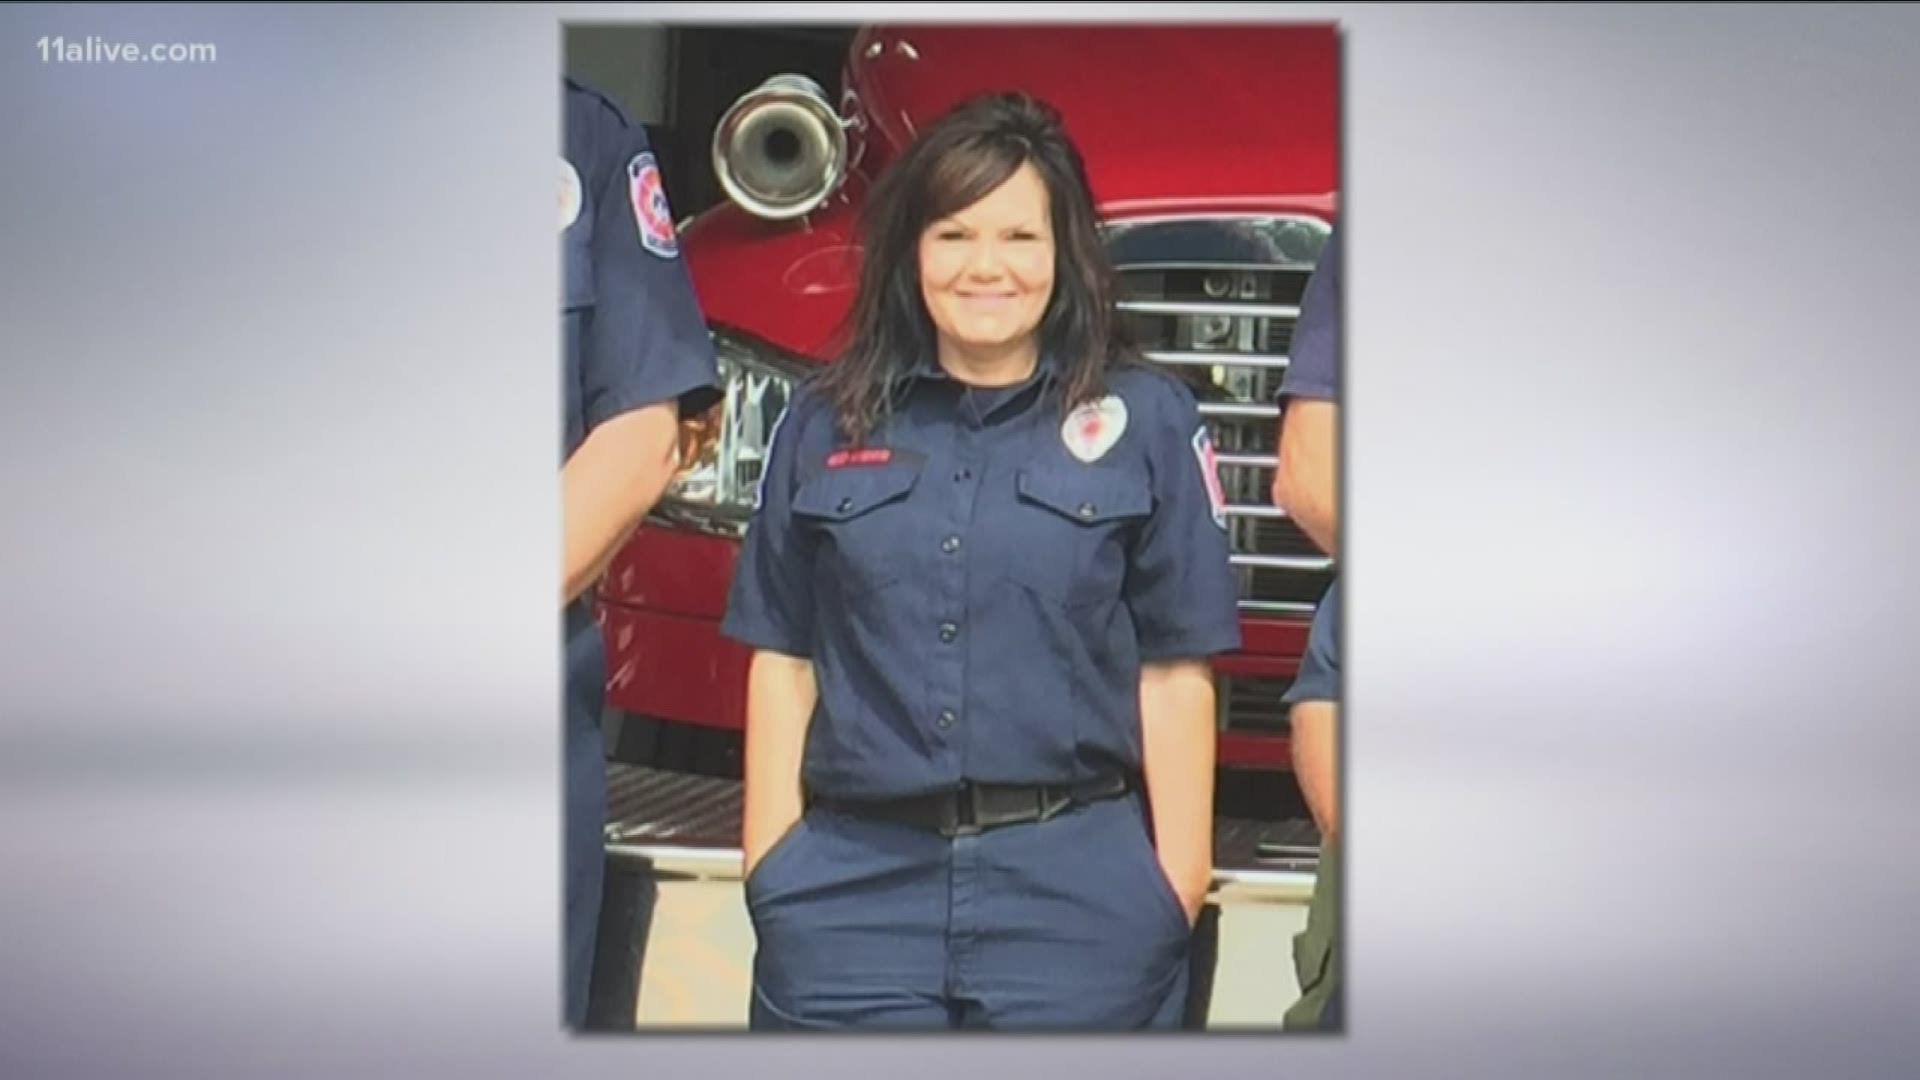 According to a Facebook post, Lt. Michelle Sowers died "after a long and well fought battle."